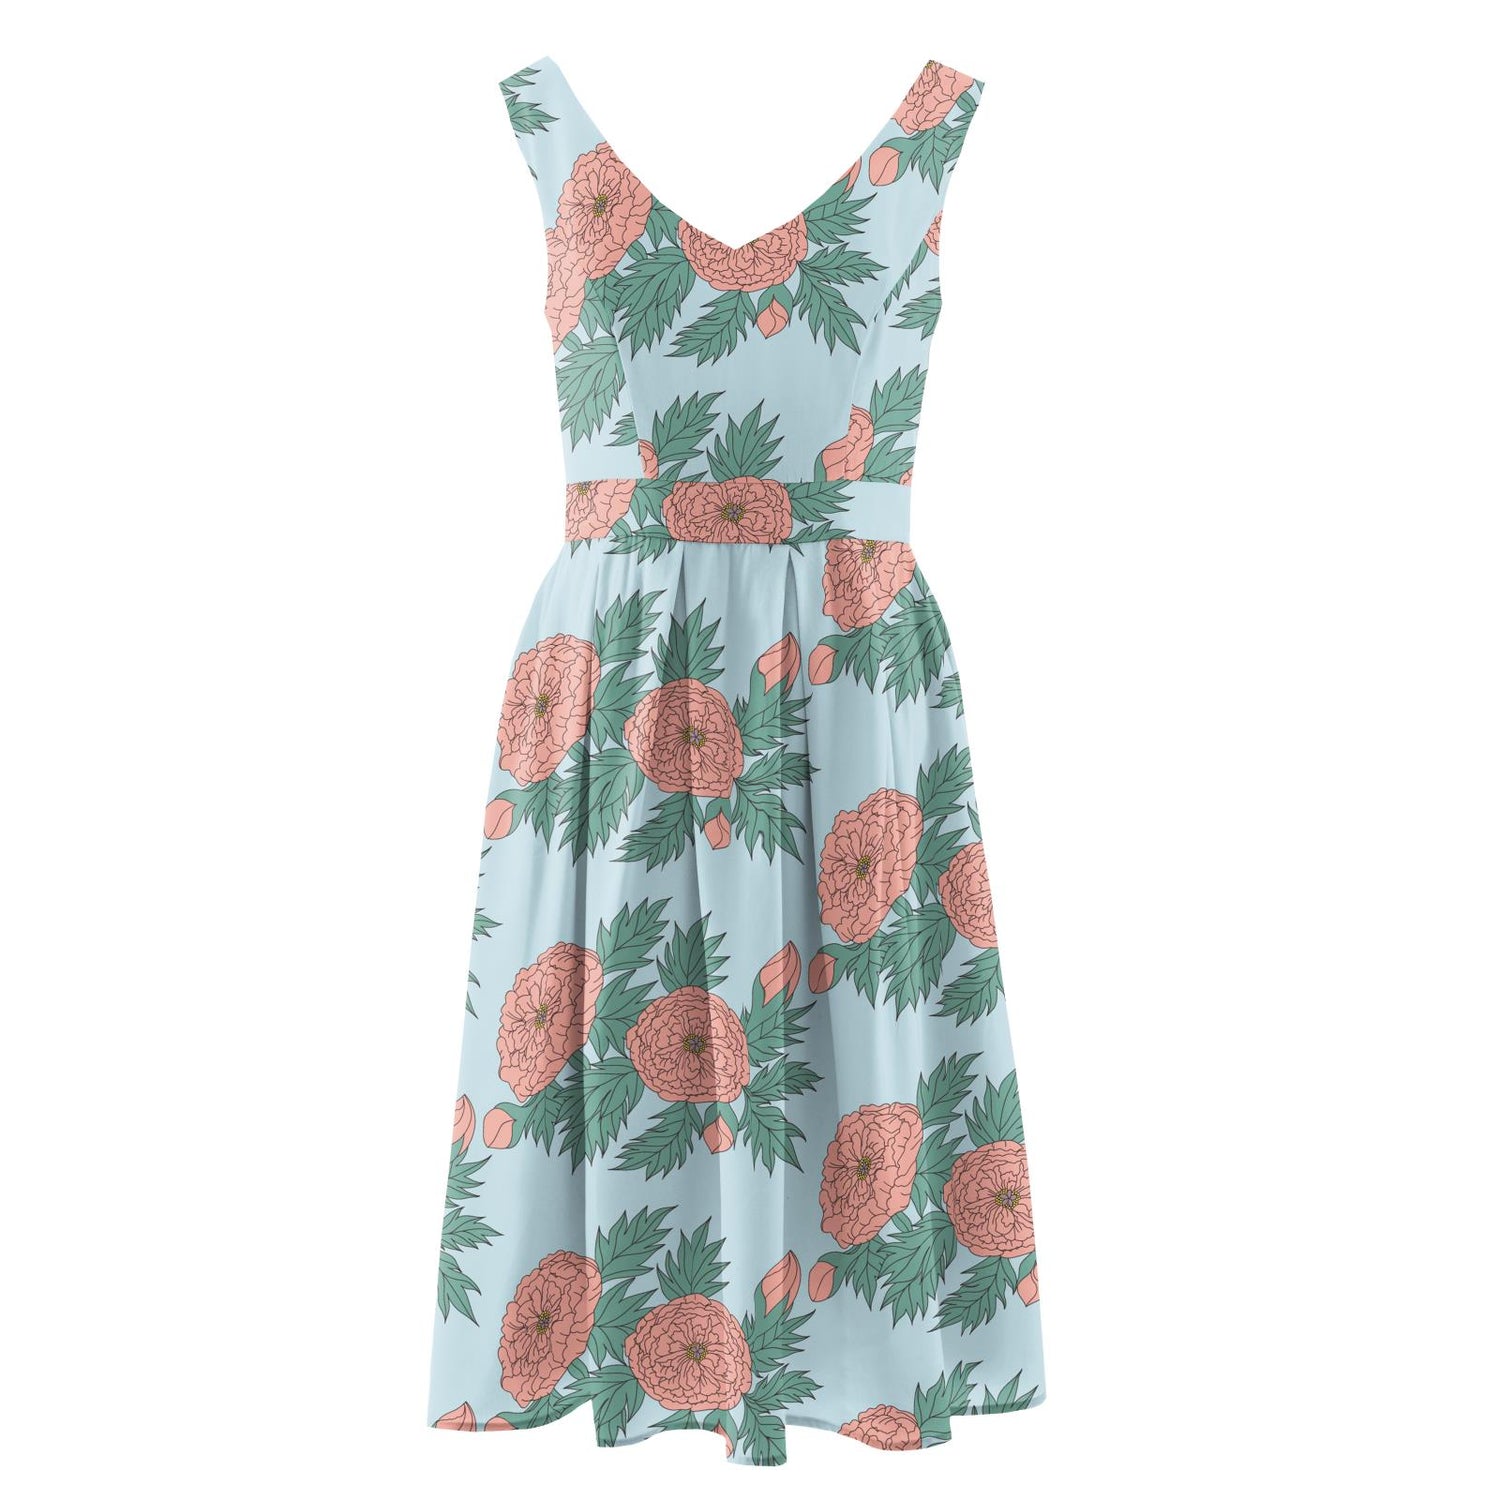 Women's Print Woven Dress in Spring Sky Floral